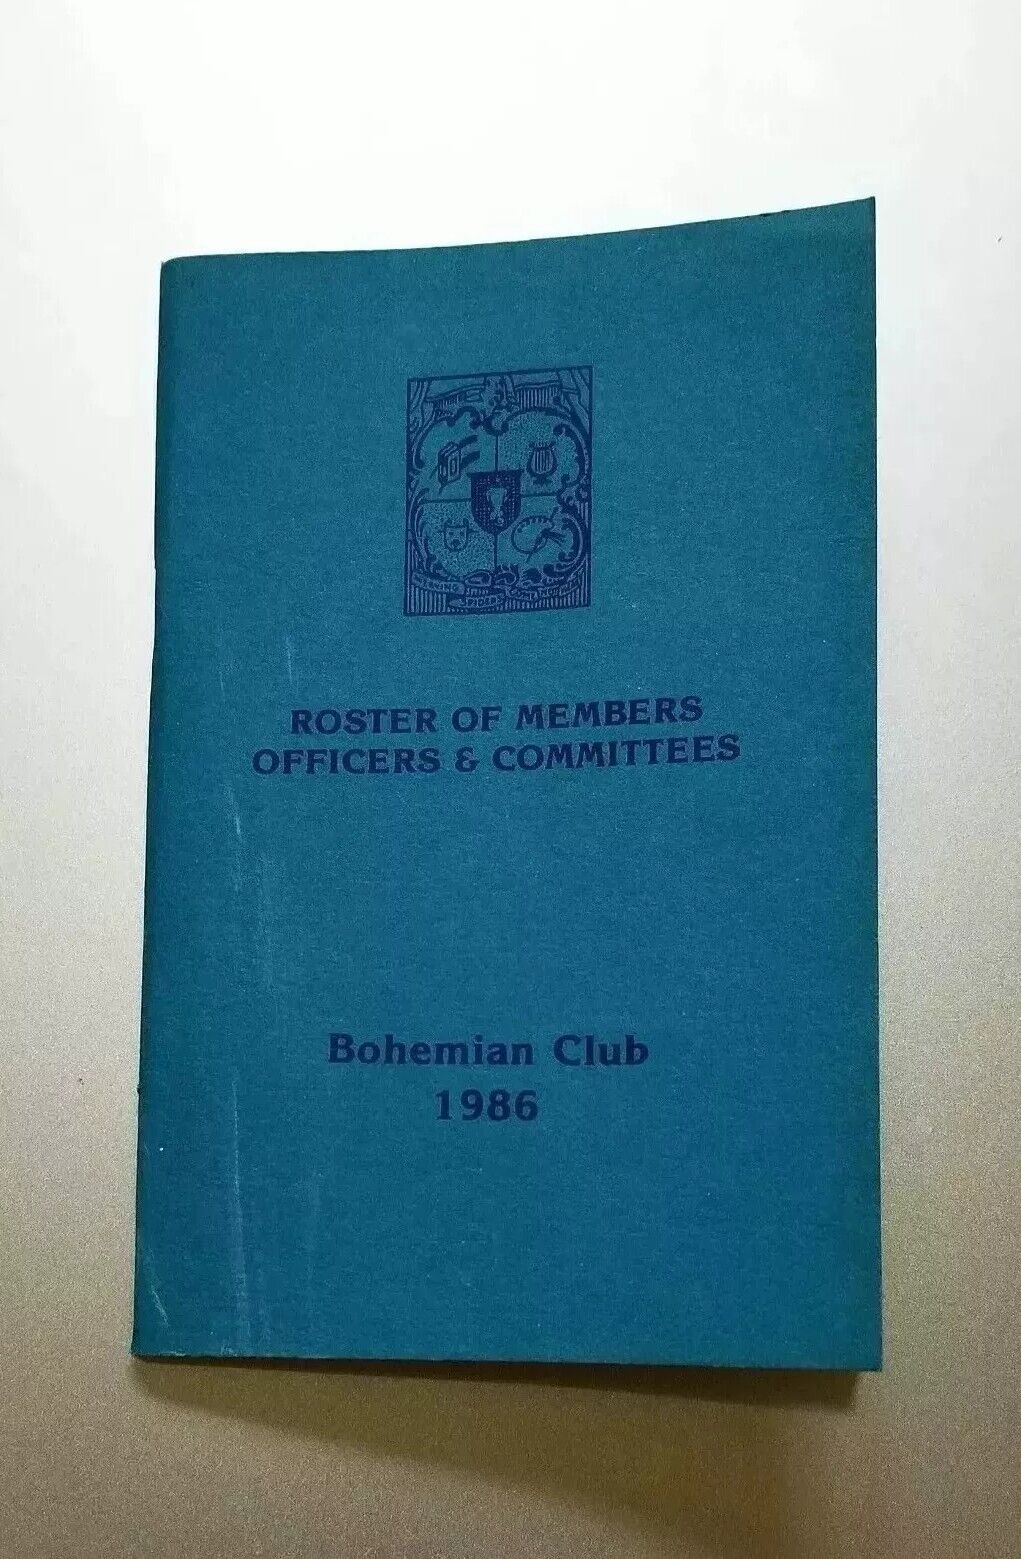 Bohemian Club 1986 Roster of Members Officers & Committees Booklet Grove Rare